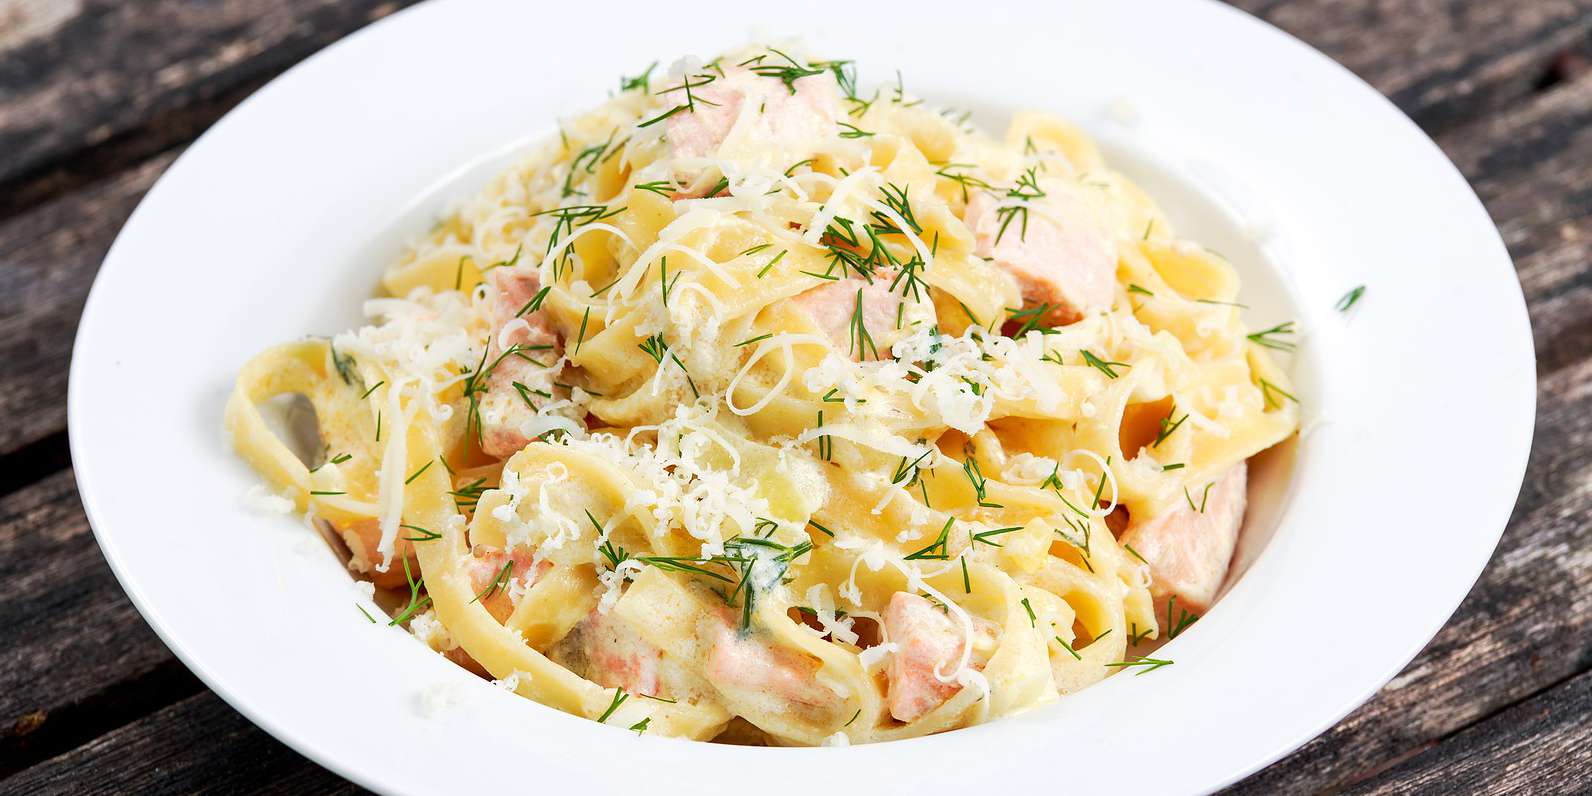 Linguine with Salmon, Leek and Dill